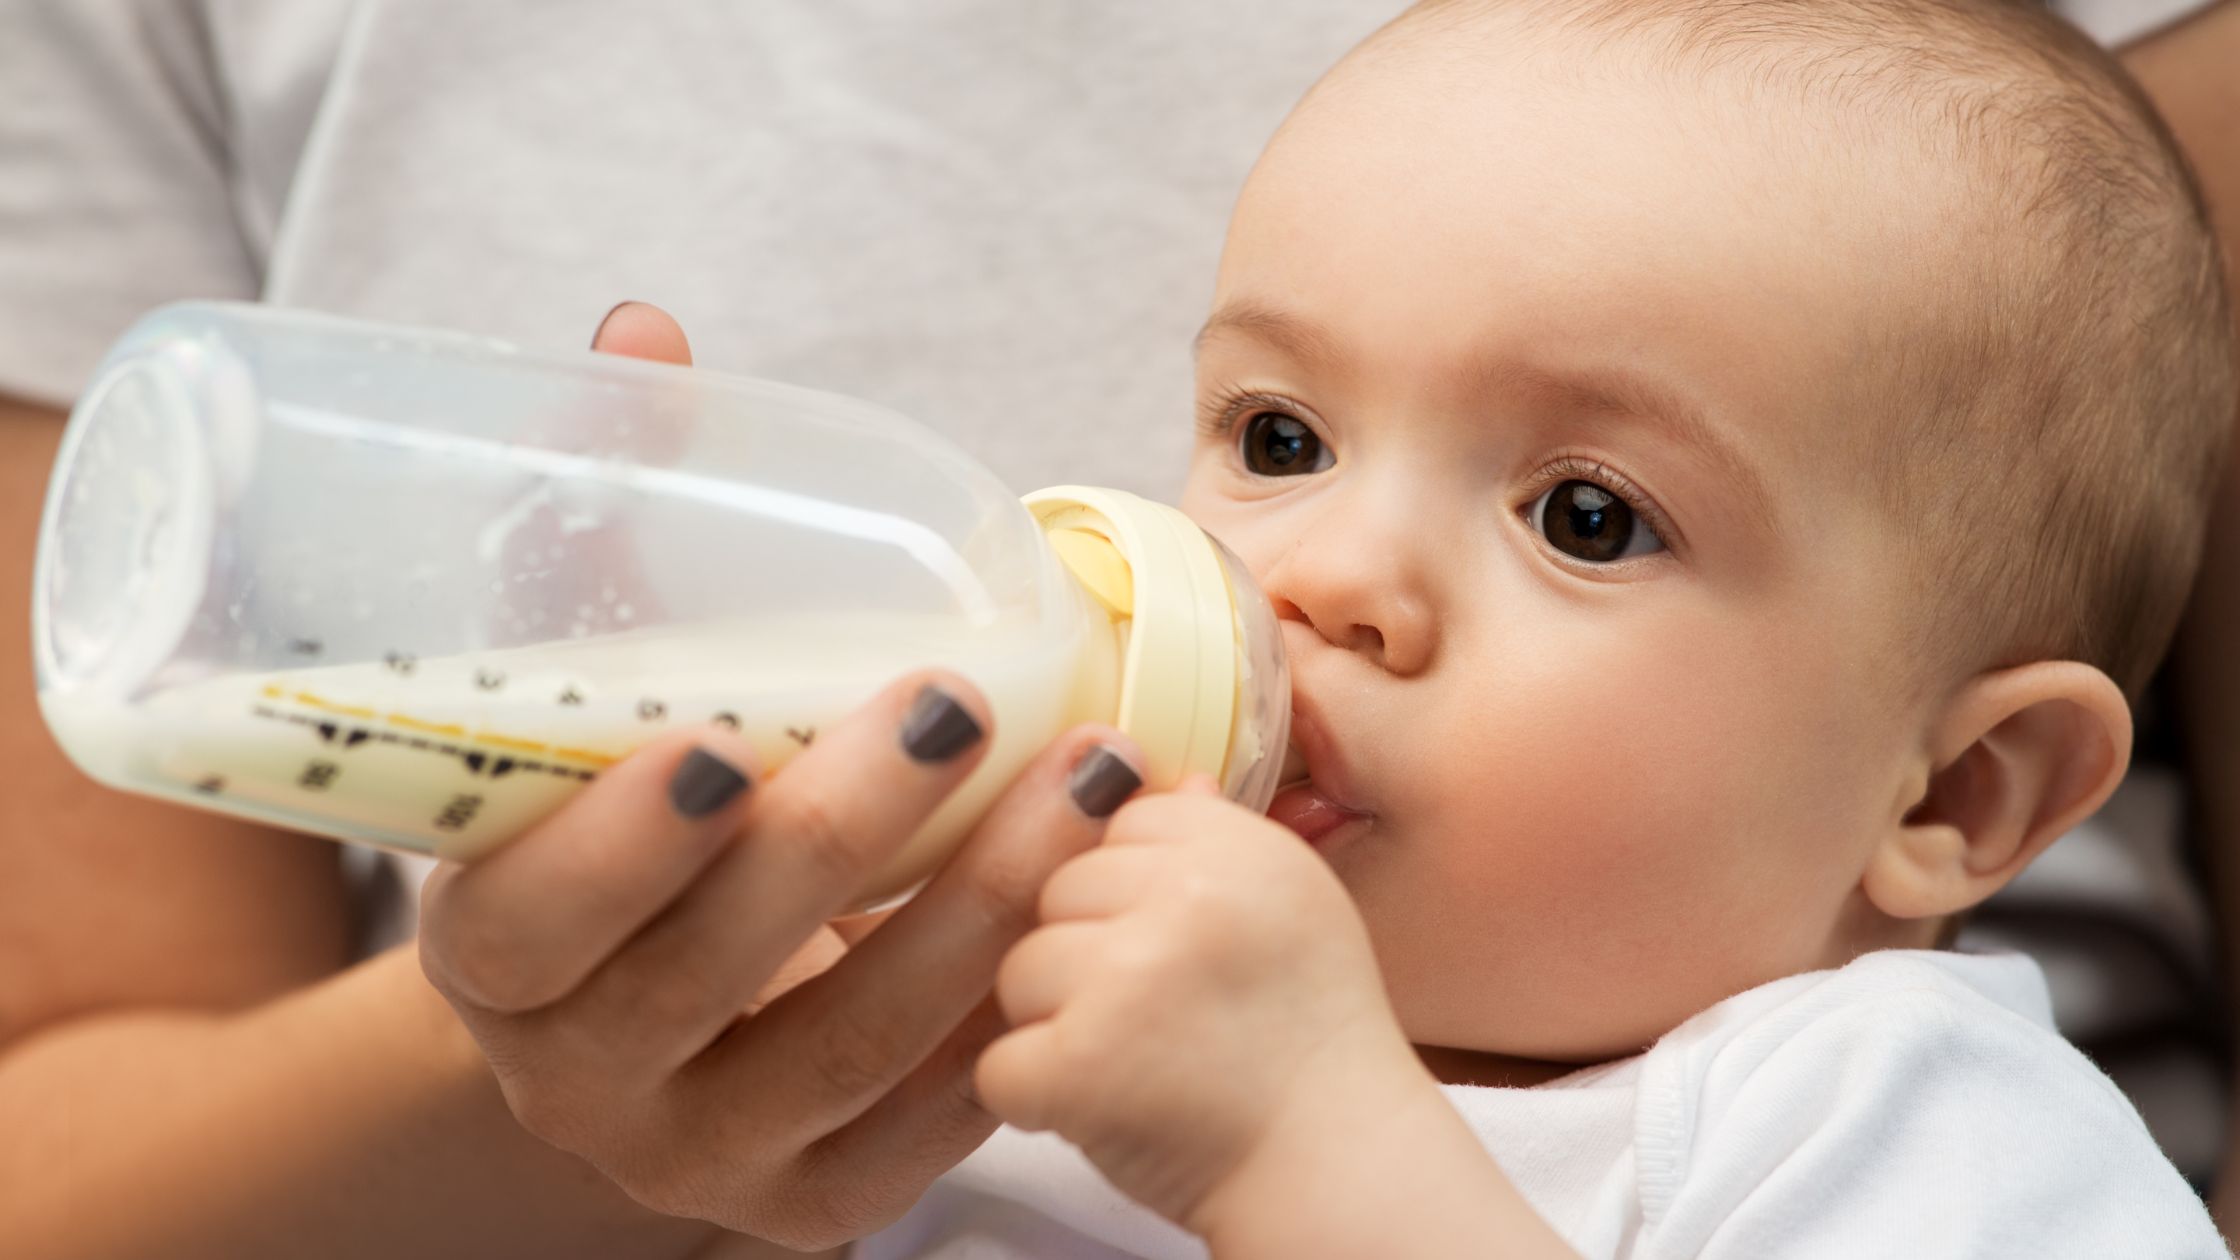 What is better for baby formula: distilled water or purified water